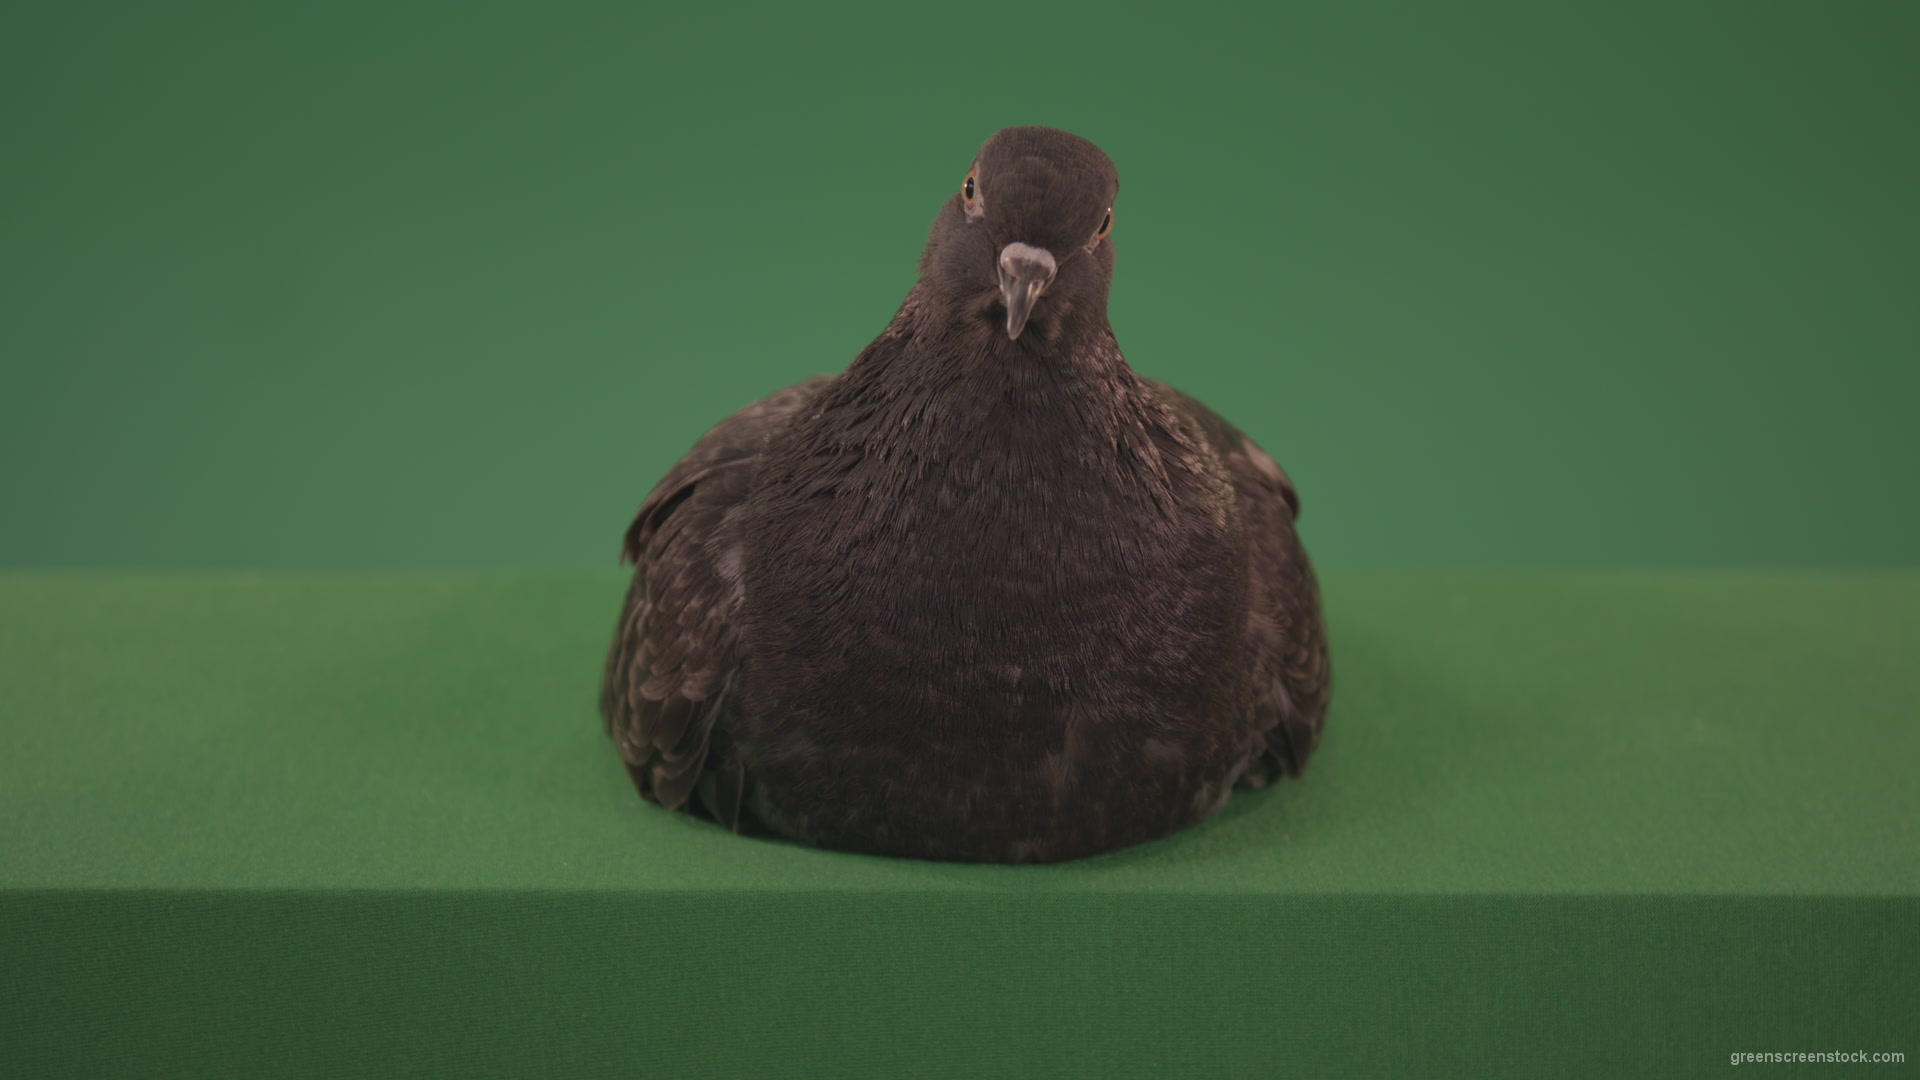 Bird-came-to-rest-staring-around-and-brushing-its-feathers-isolated-on-chromakey-background_007 Green Screen Stock